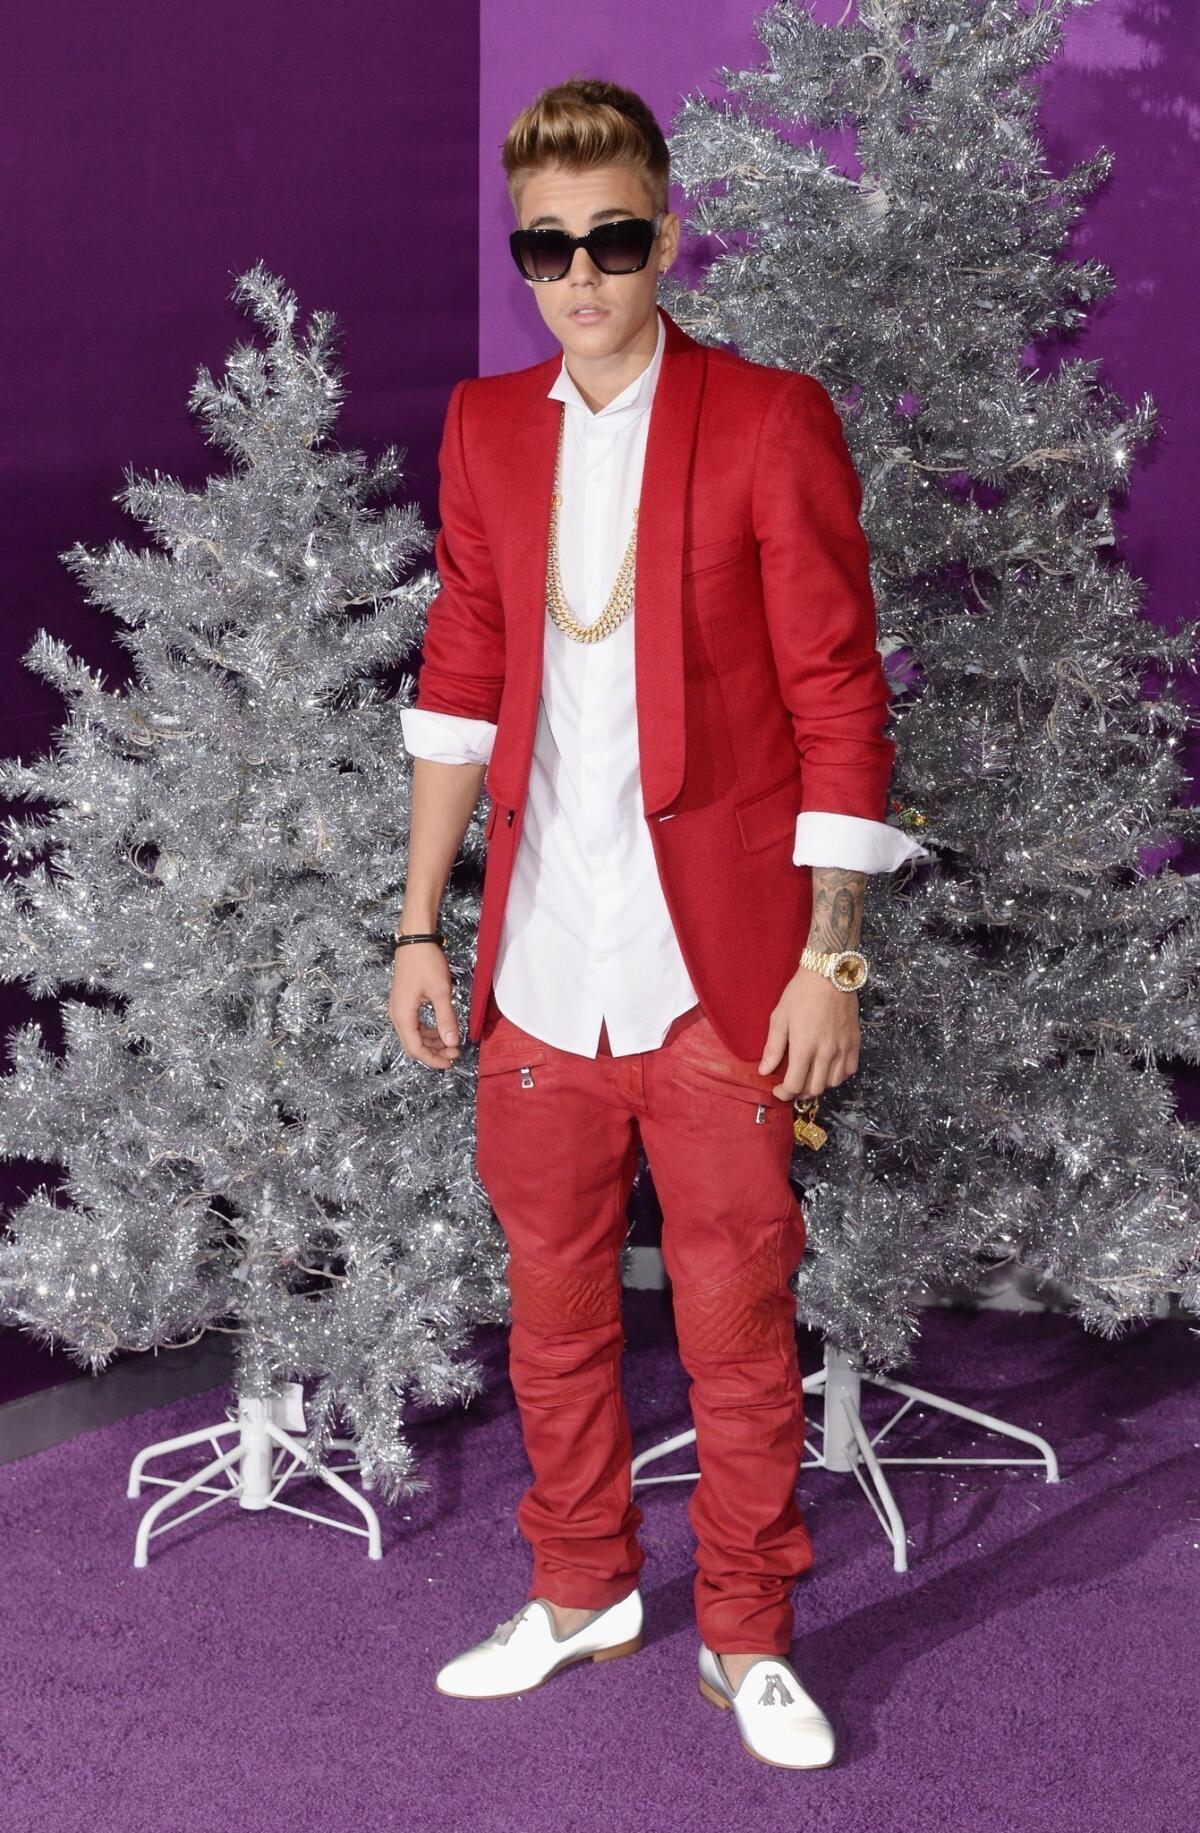 Justin Bieber wears Balmain to emulate Frank Sinatra at the premiere of "Justin Bieber's Believe" in Los Angeles.